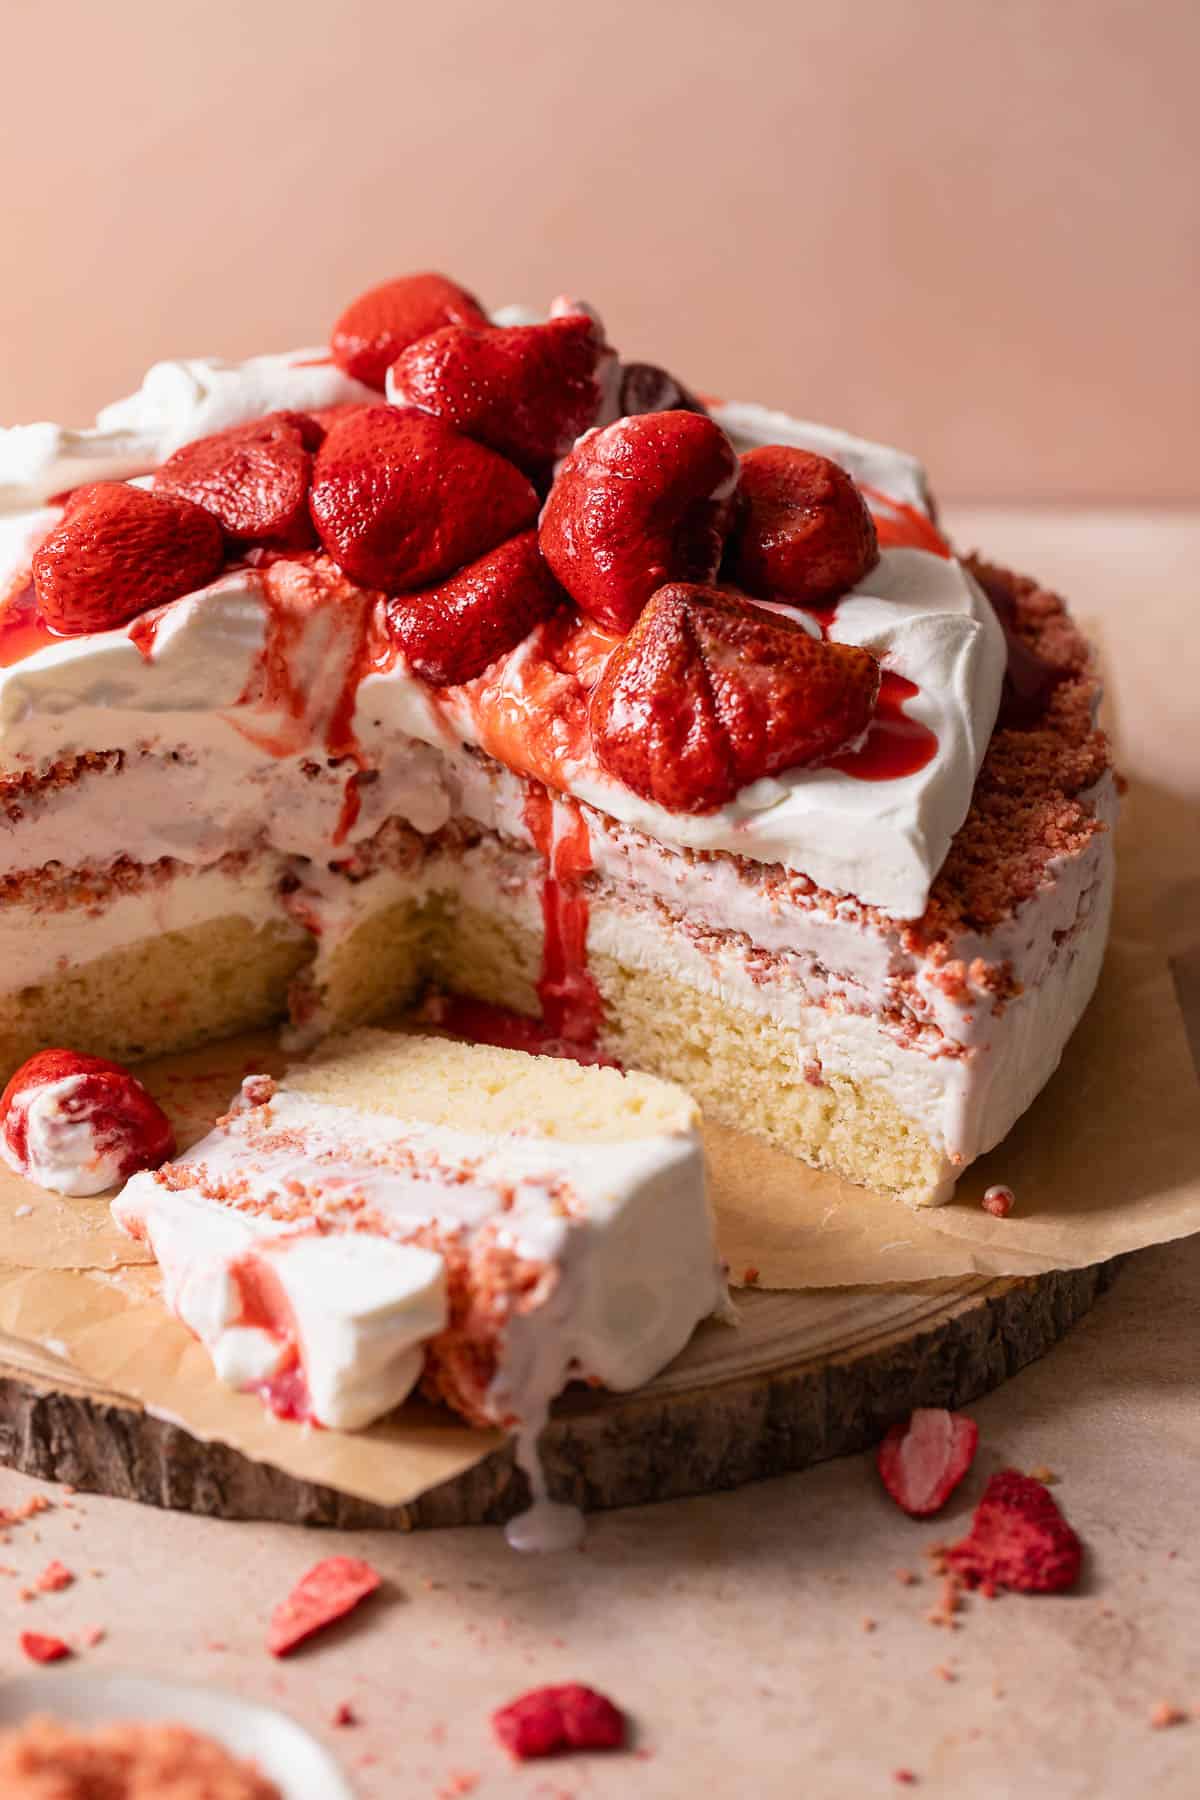 Strawberry ice cream cake topped with whipped cream and strawberries on a wooden cake platter.